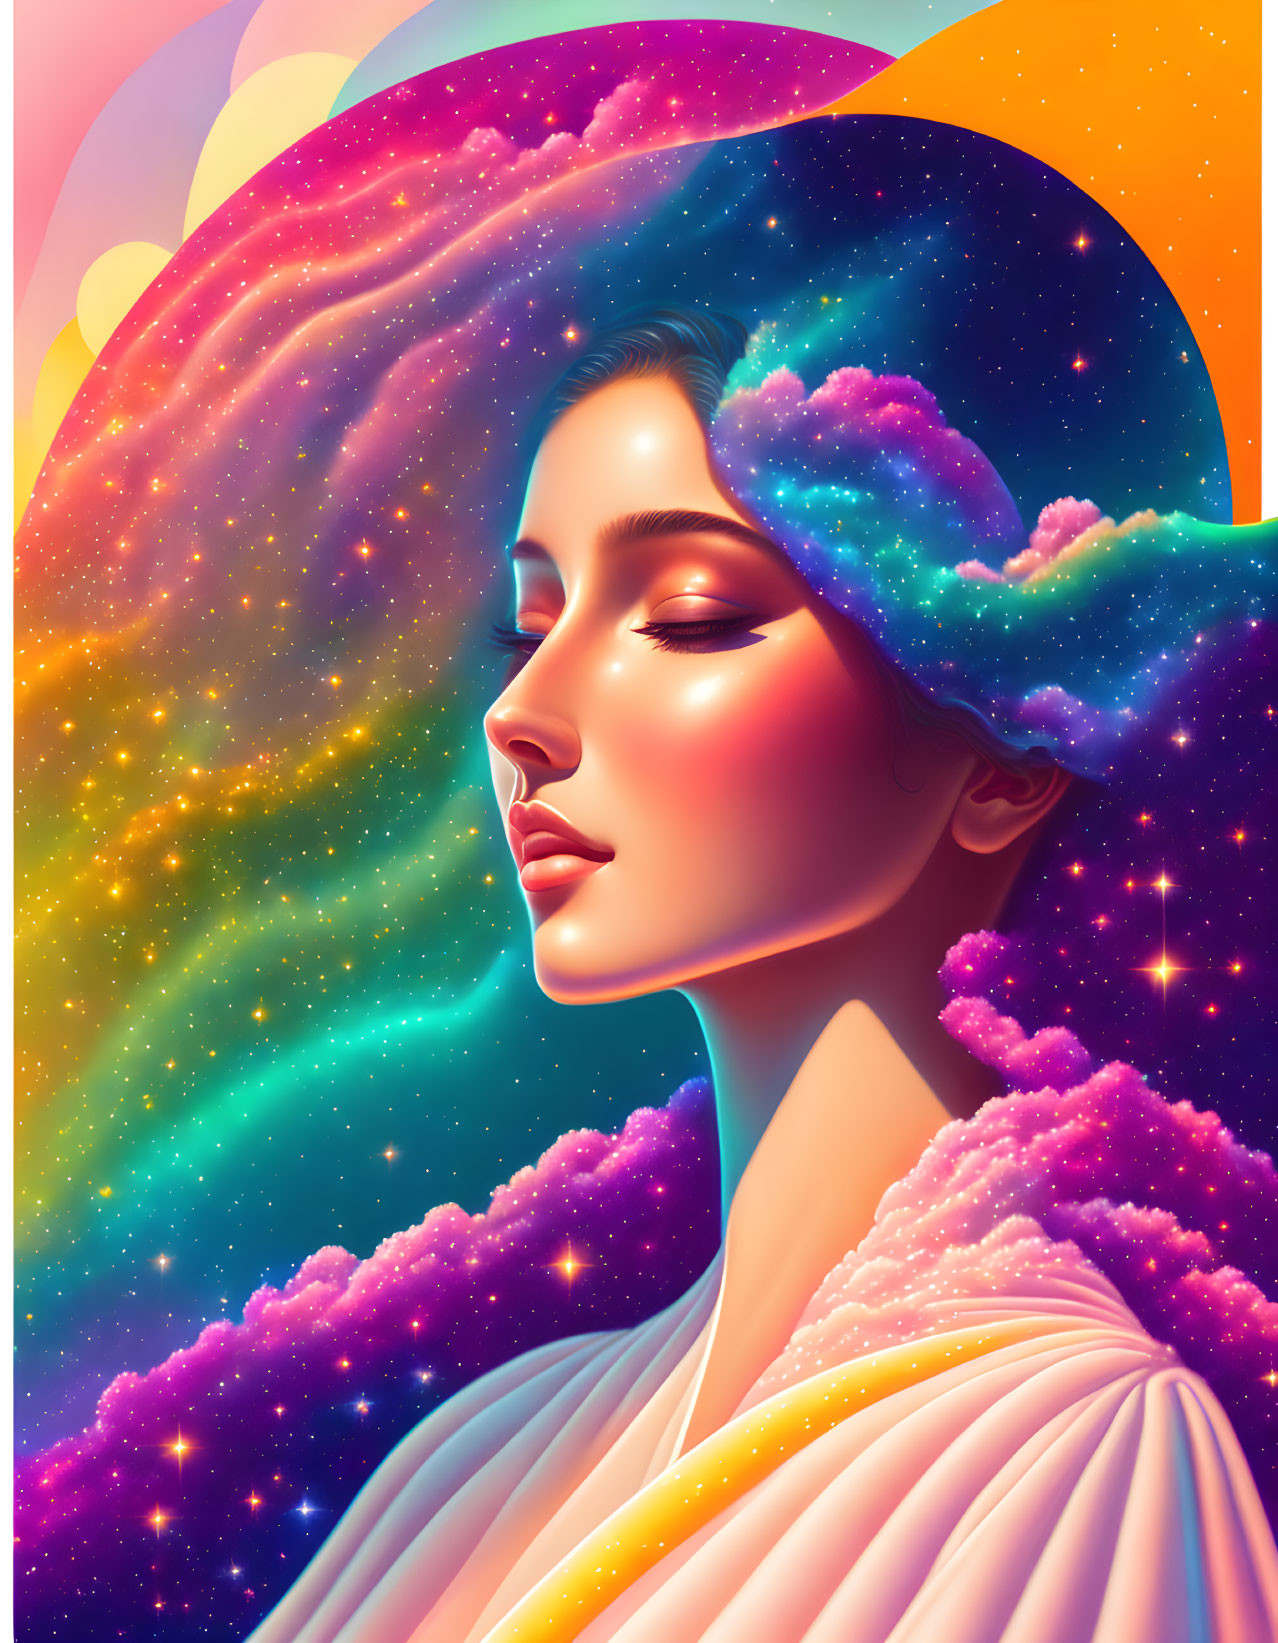 Colorful portrait of woman with cosmic hair in starry sky setting